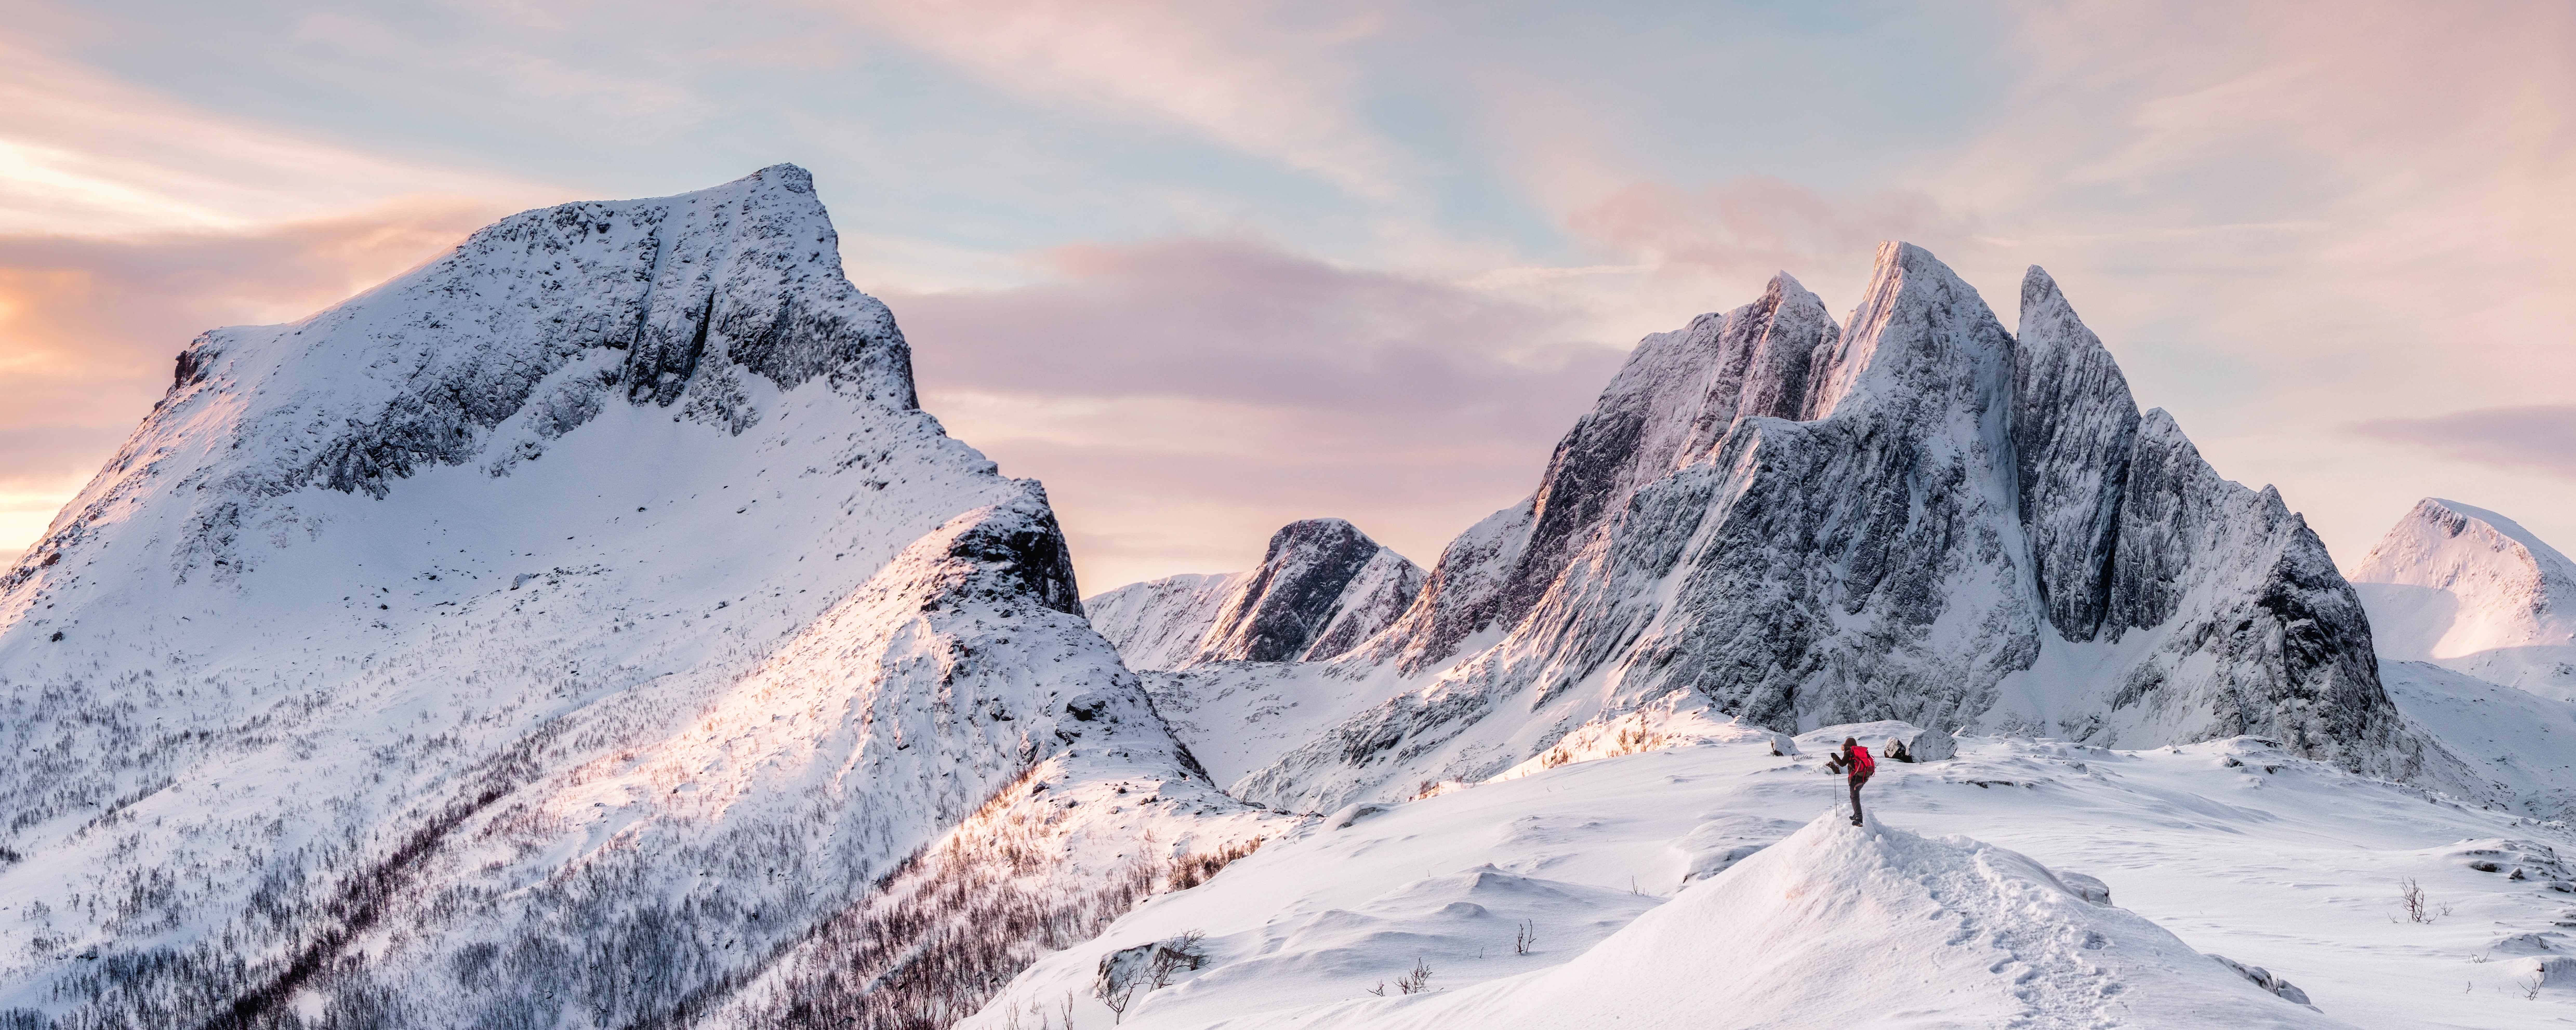 A mountaineer heading for their objective at sunrise. Photo: Mumemories, Shutterstock